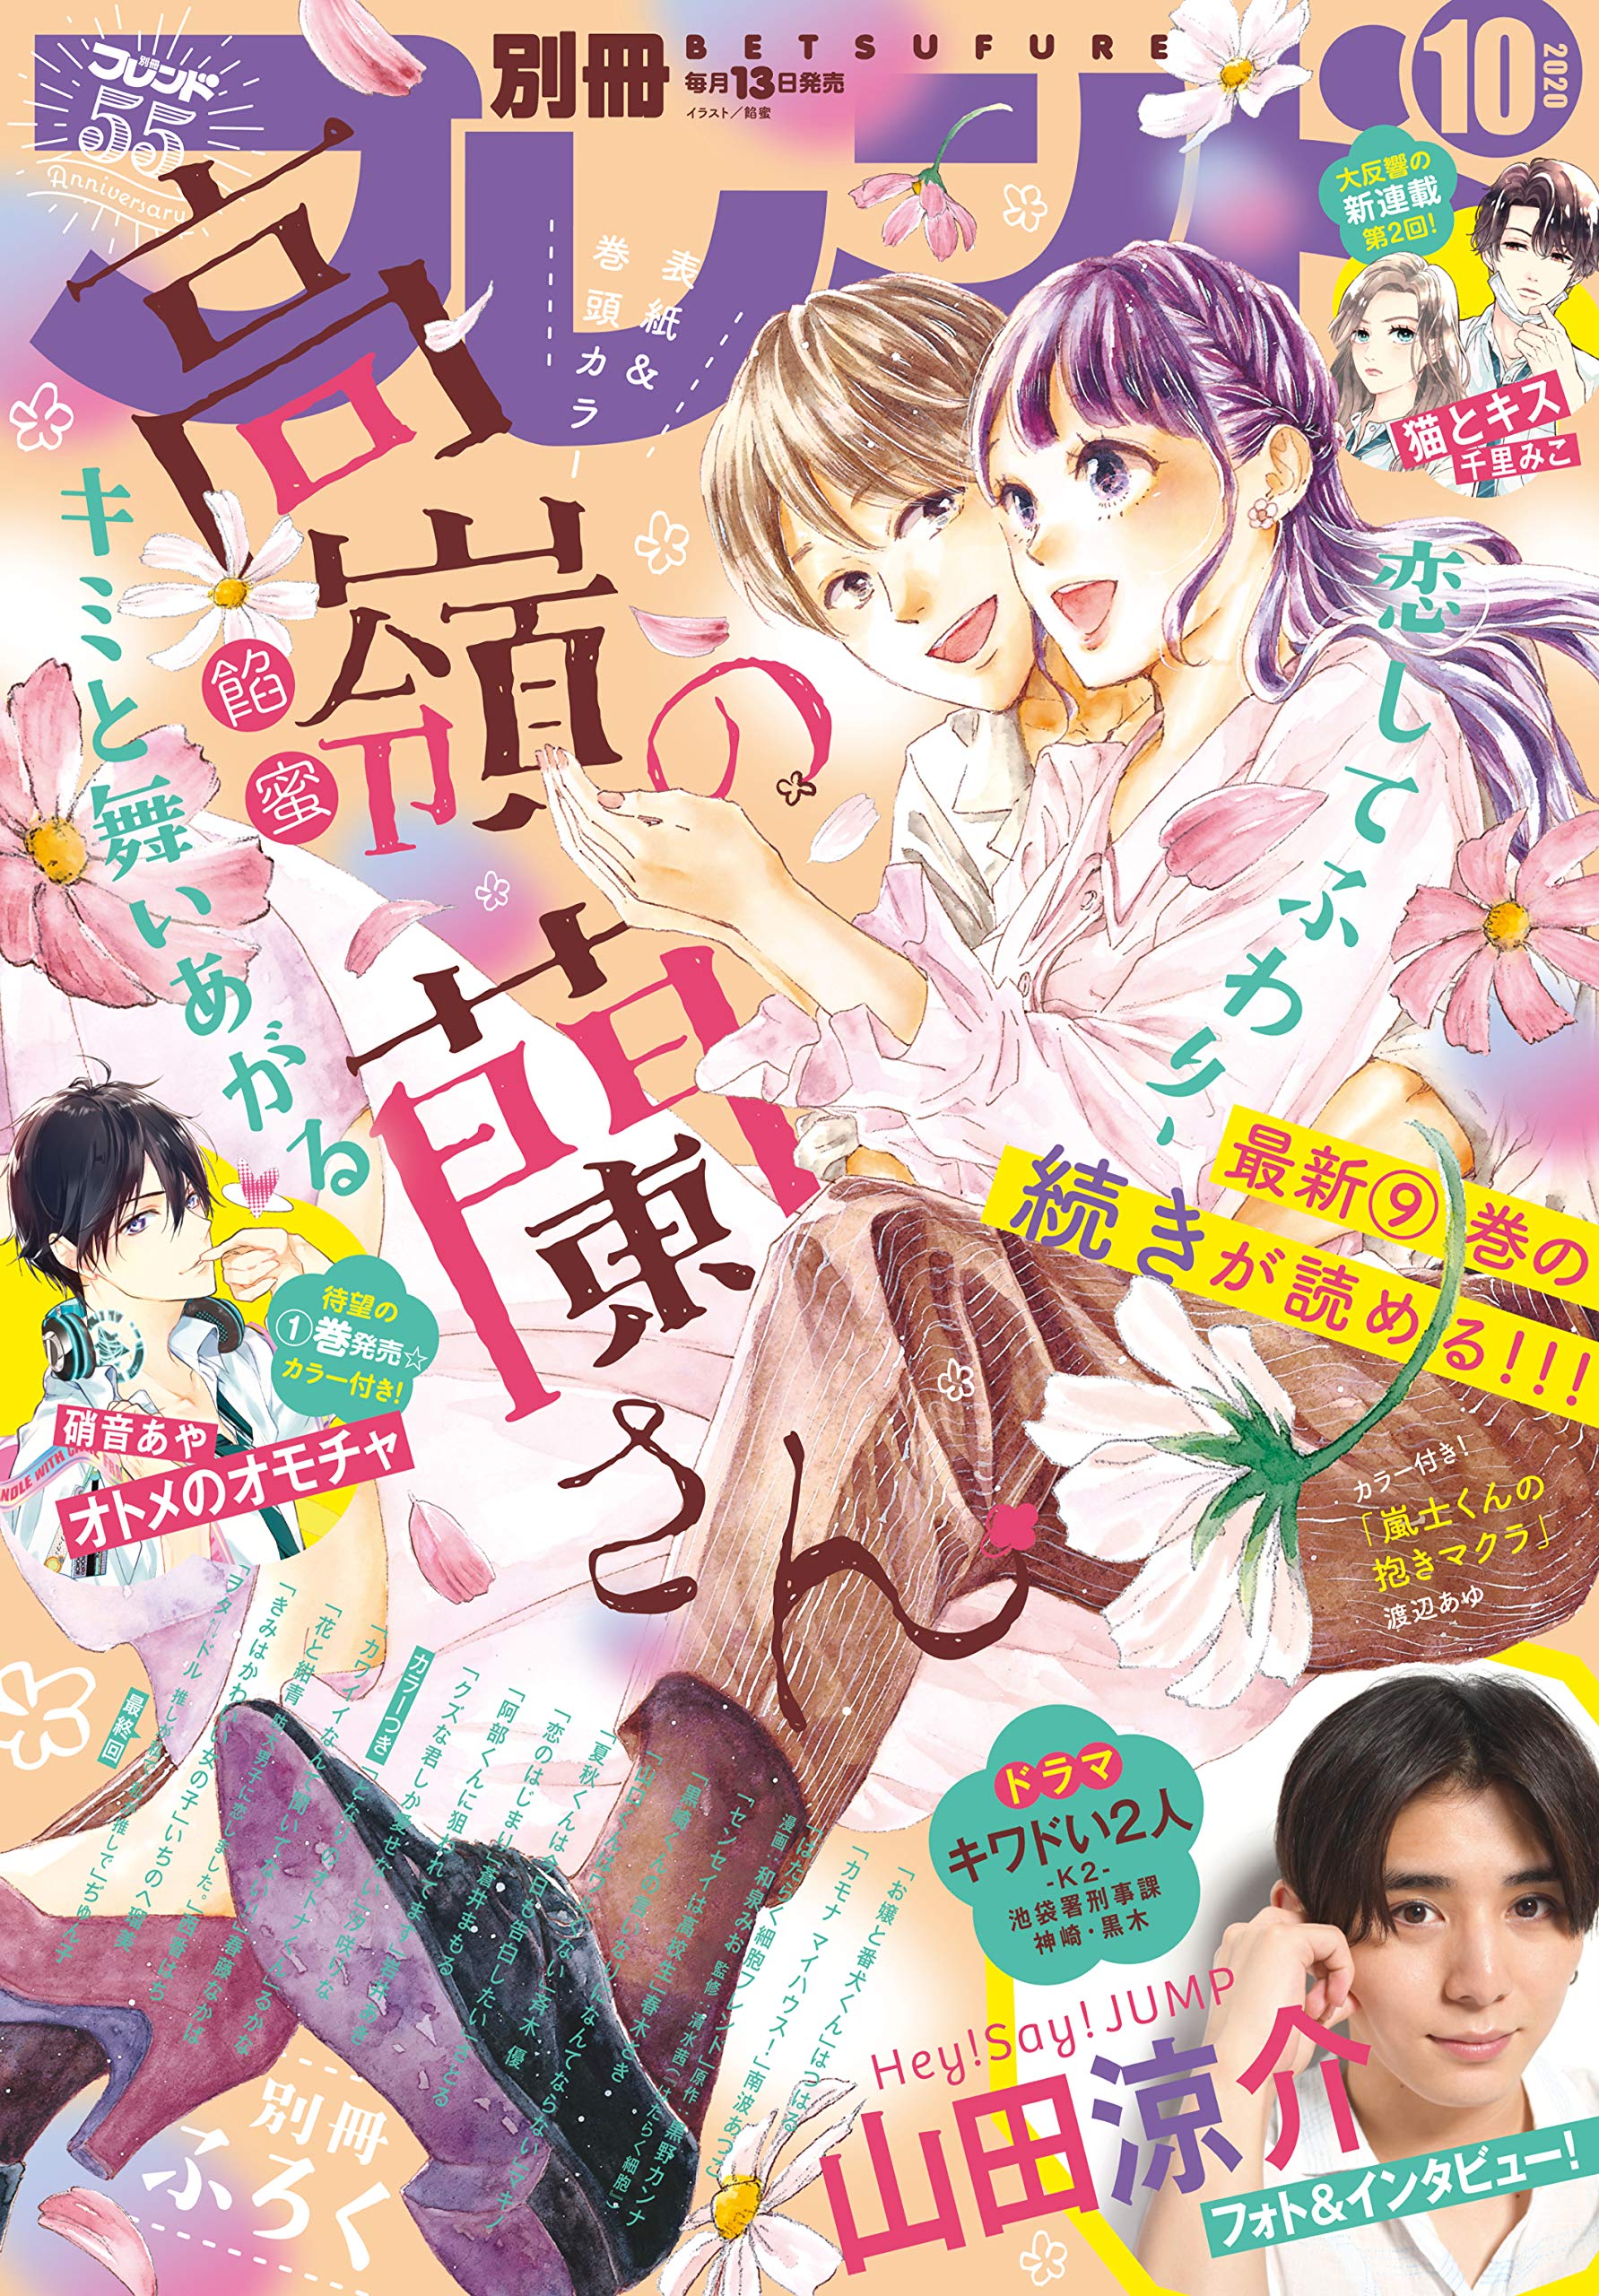 Manga Mogura Auf Twitter Takane No Ran San By Ammitsu Is On The Cover Of The Upcoming Bessatsu Friends Issue 10 T Co N5ypvymsp1 Twitter